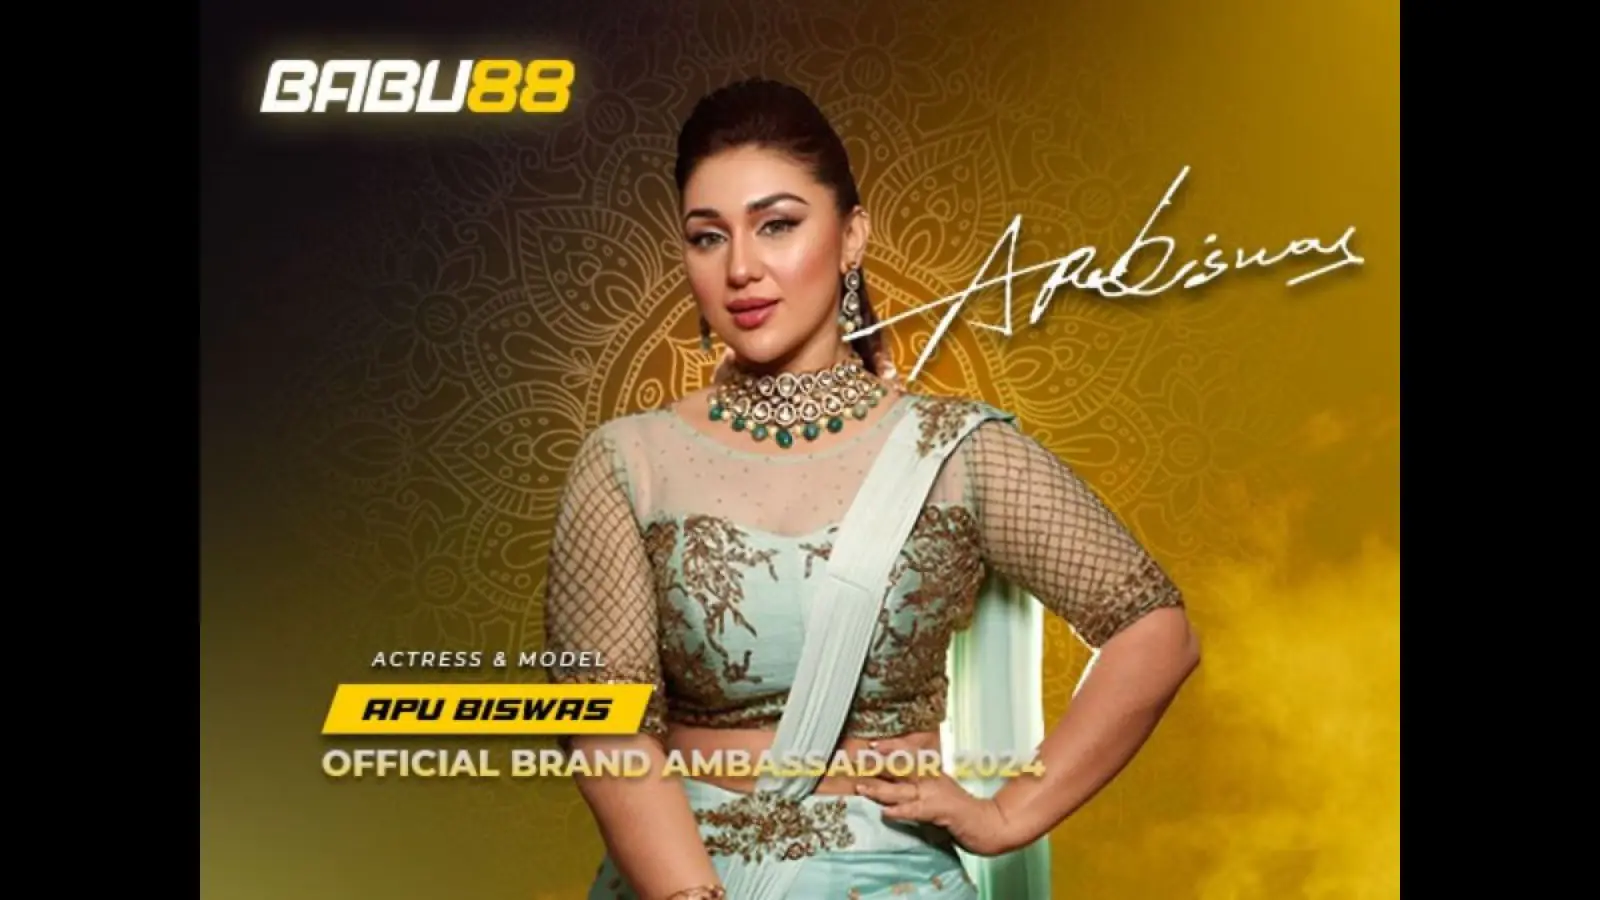 BABU88 Proudly Announced Sponsorship Partnership with Acclaimed Actress Apu Biswas